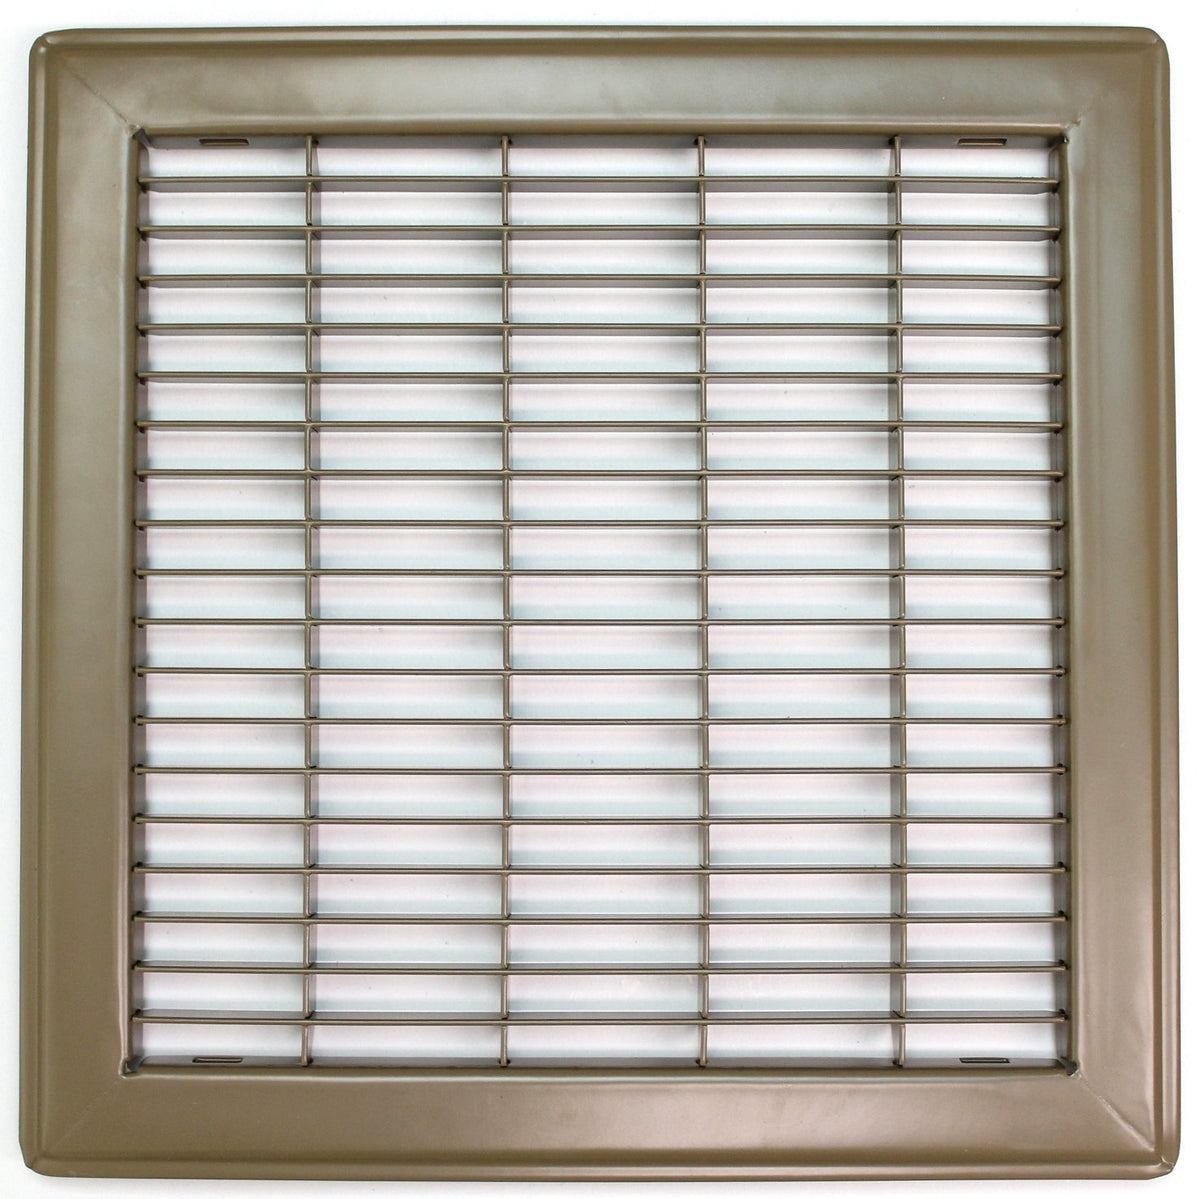 12&quot; X 12&quot;  Heavy Duty Floor Grille - Fixed Blades Air Grille - Brown [Outer Dimensions: 13.75 X 13.75]